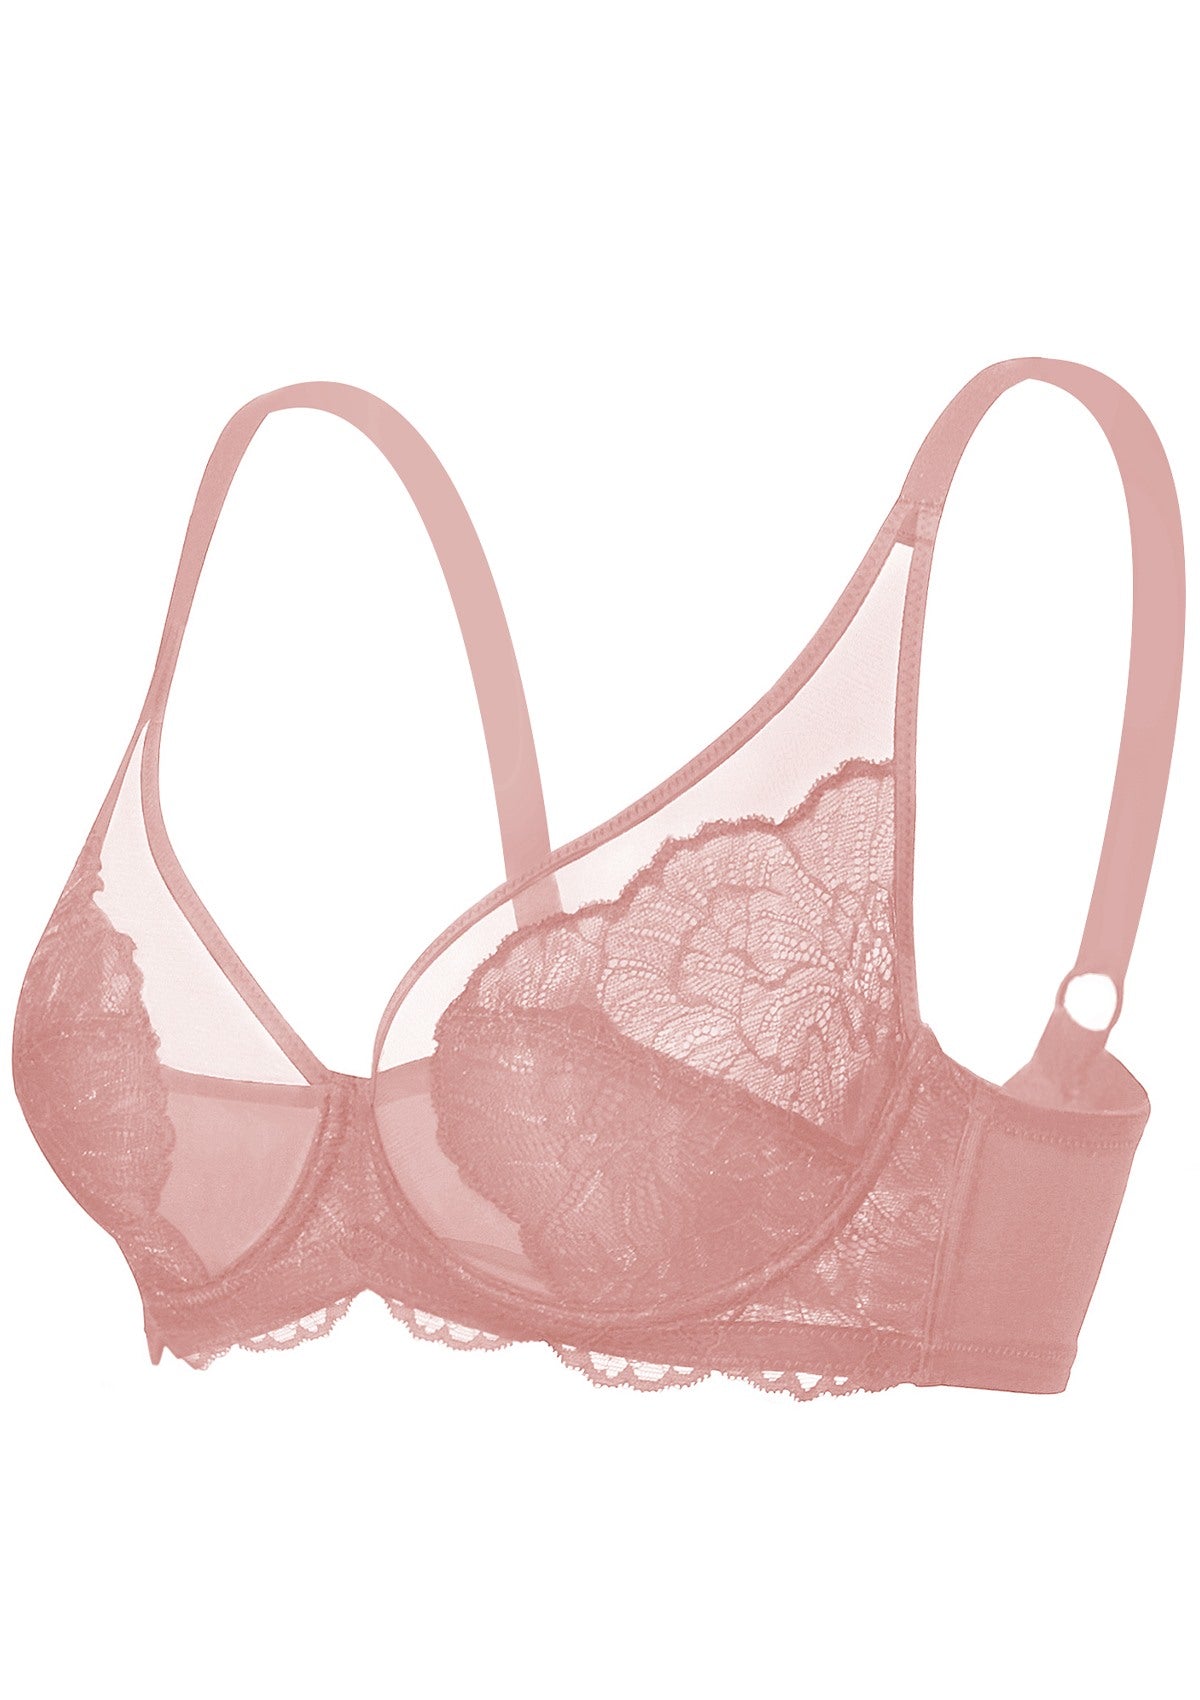 HSIA Blossom Unlined Lace Underwire Bra - Raspberry / 42 / D